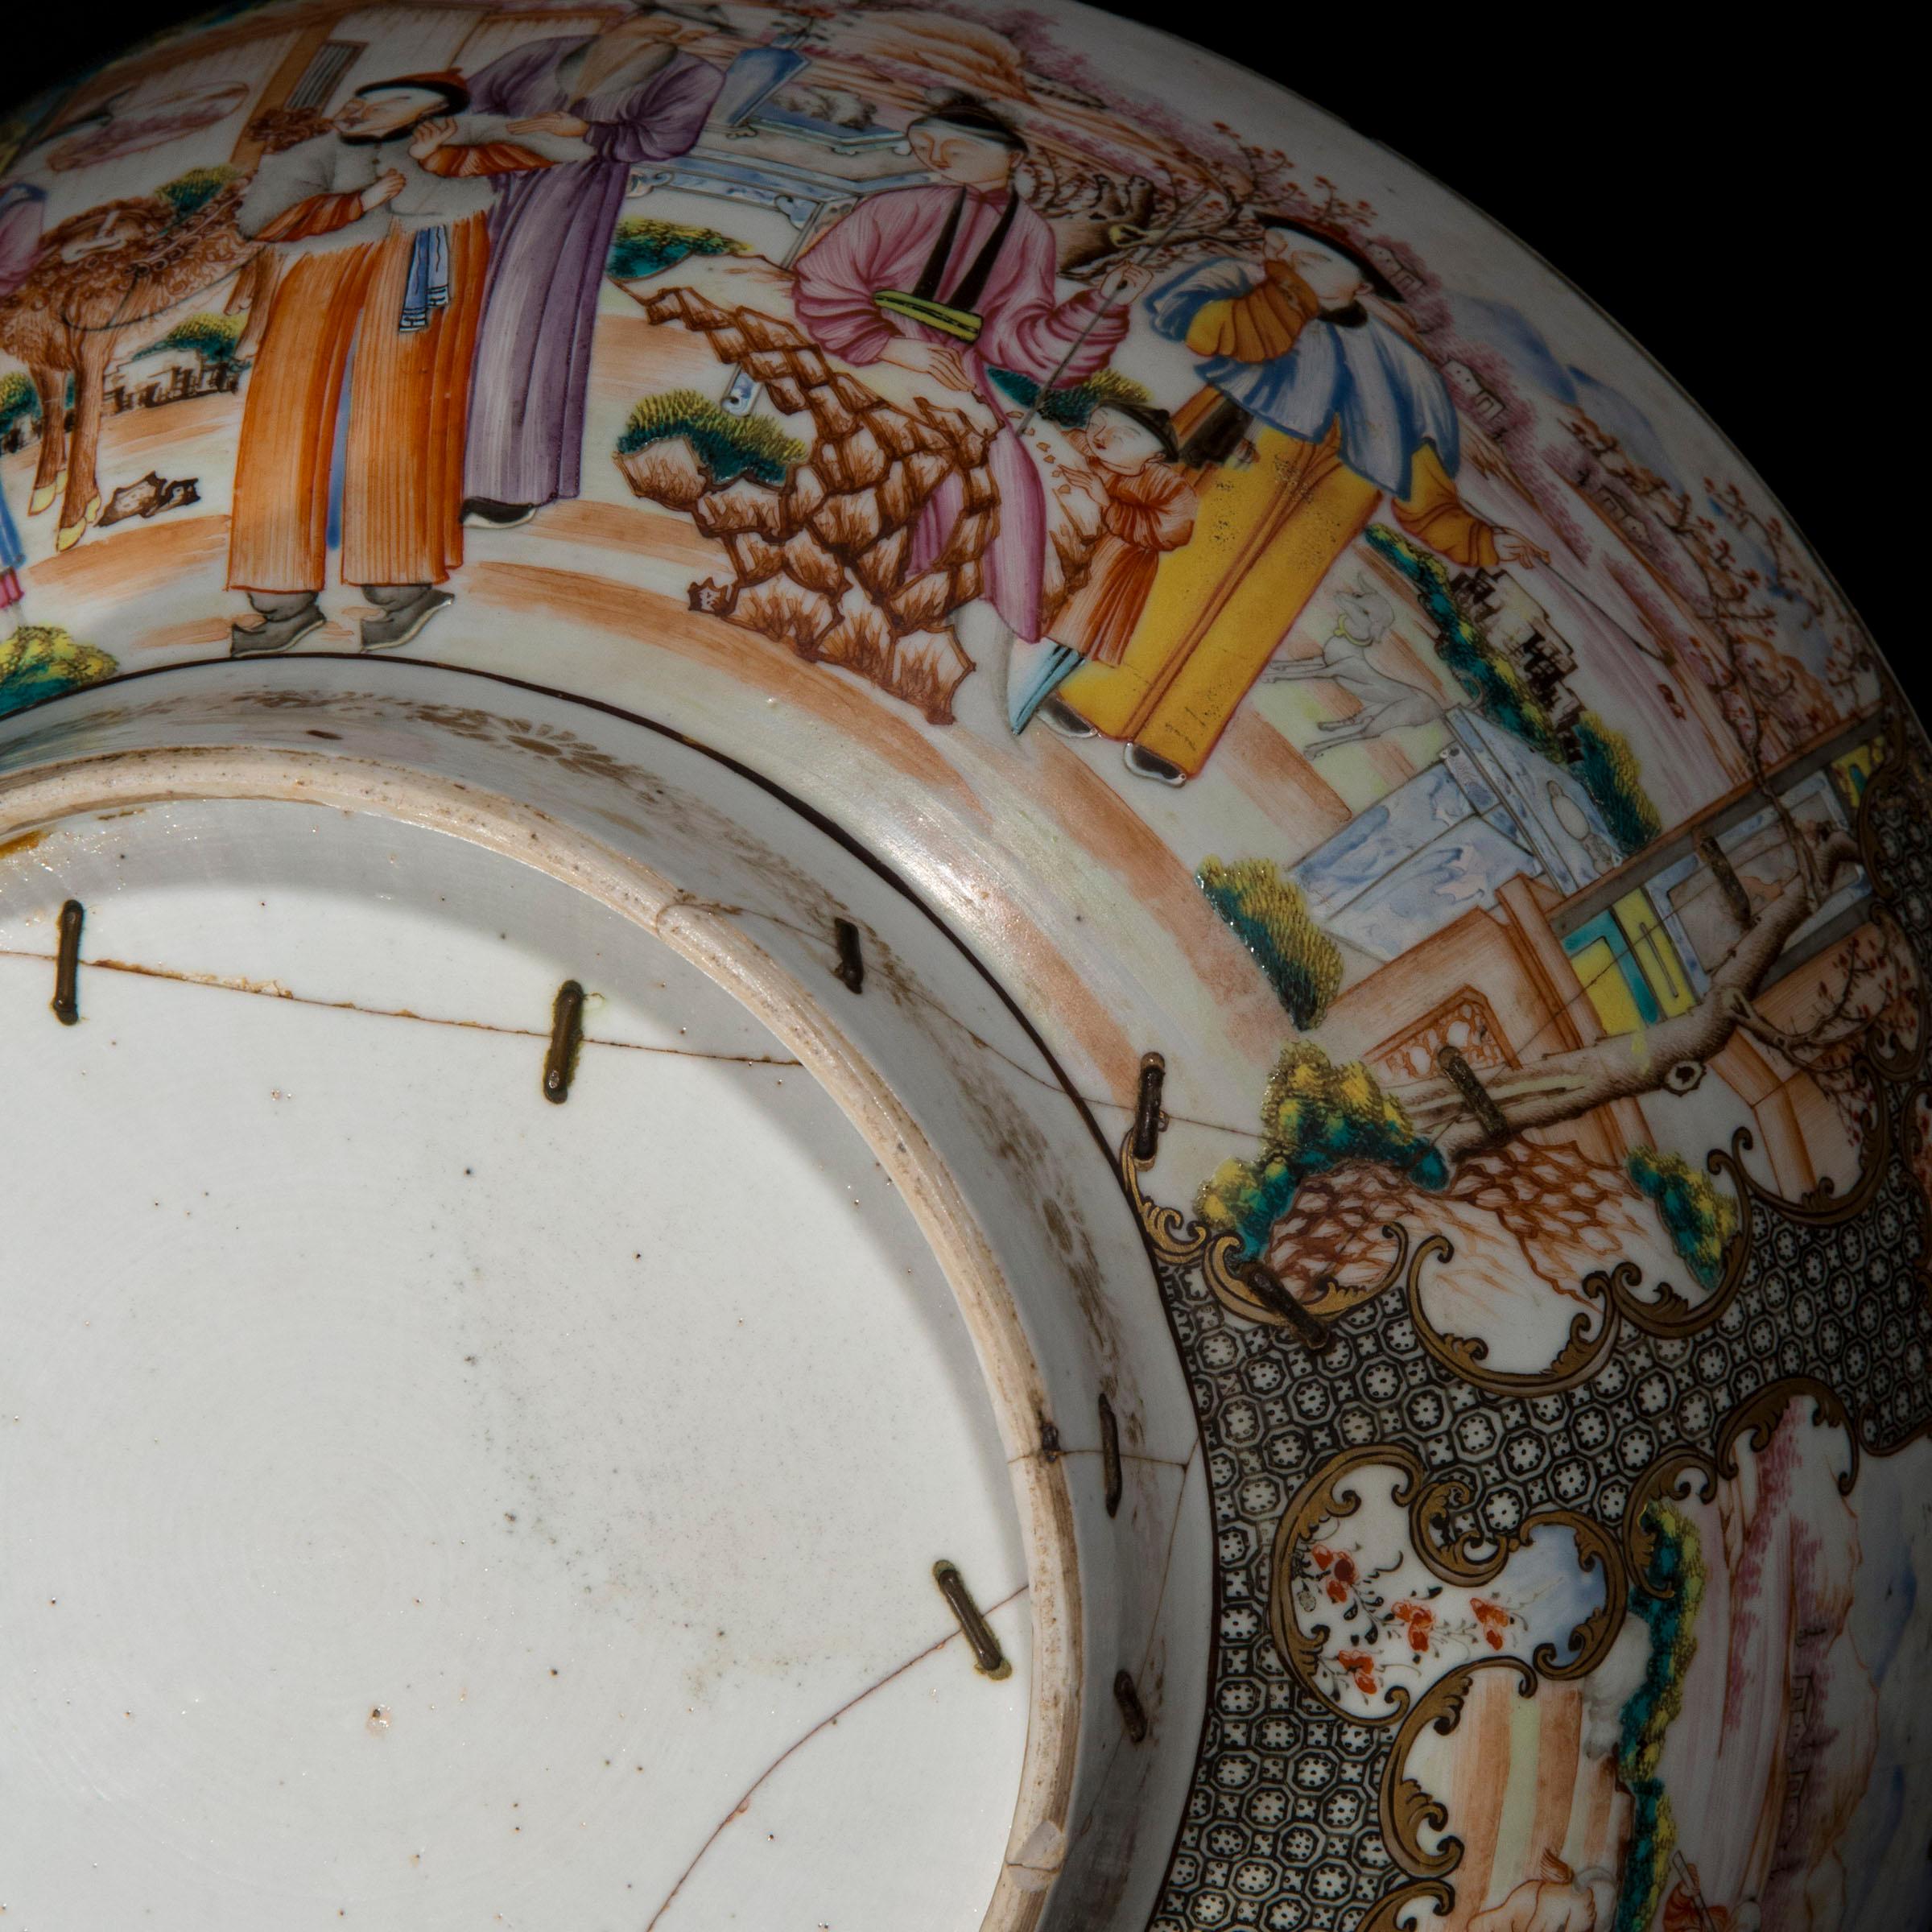 Hand-Painted 18th Century Chinese Export Porcelain Bowl with Old Riveted Repairs